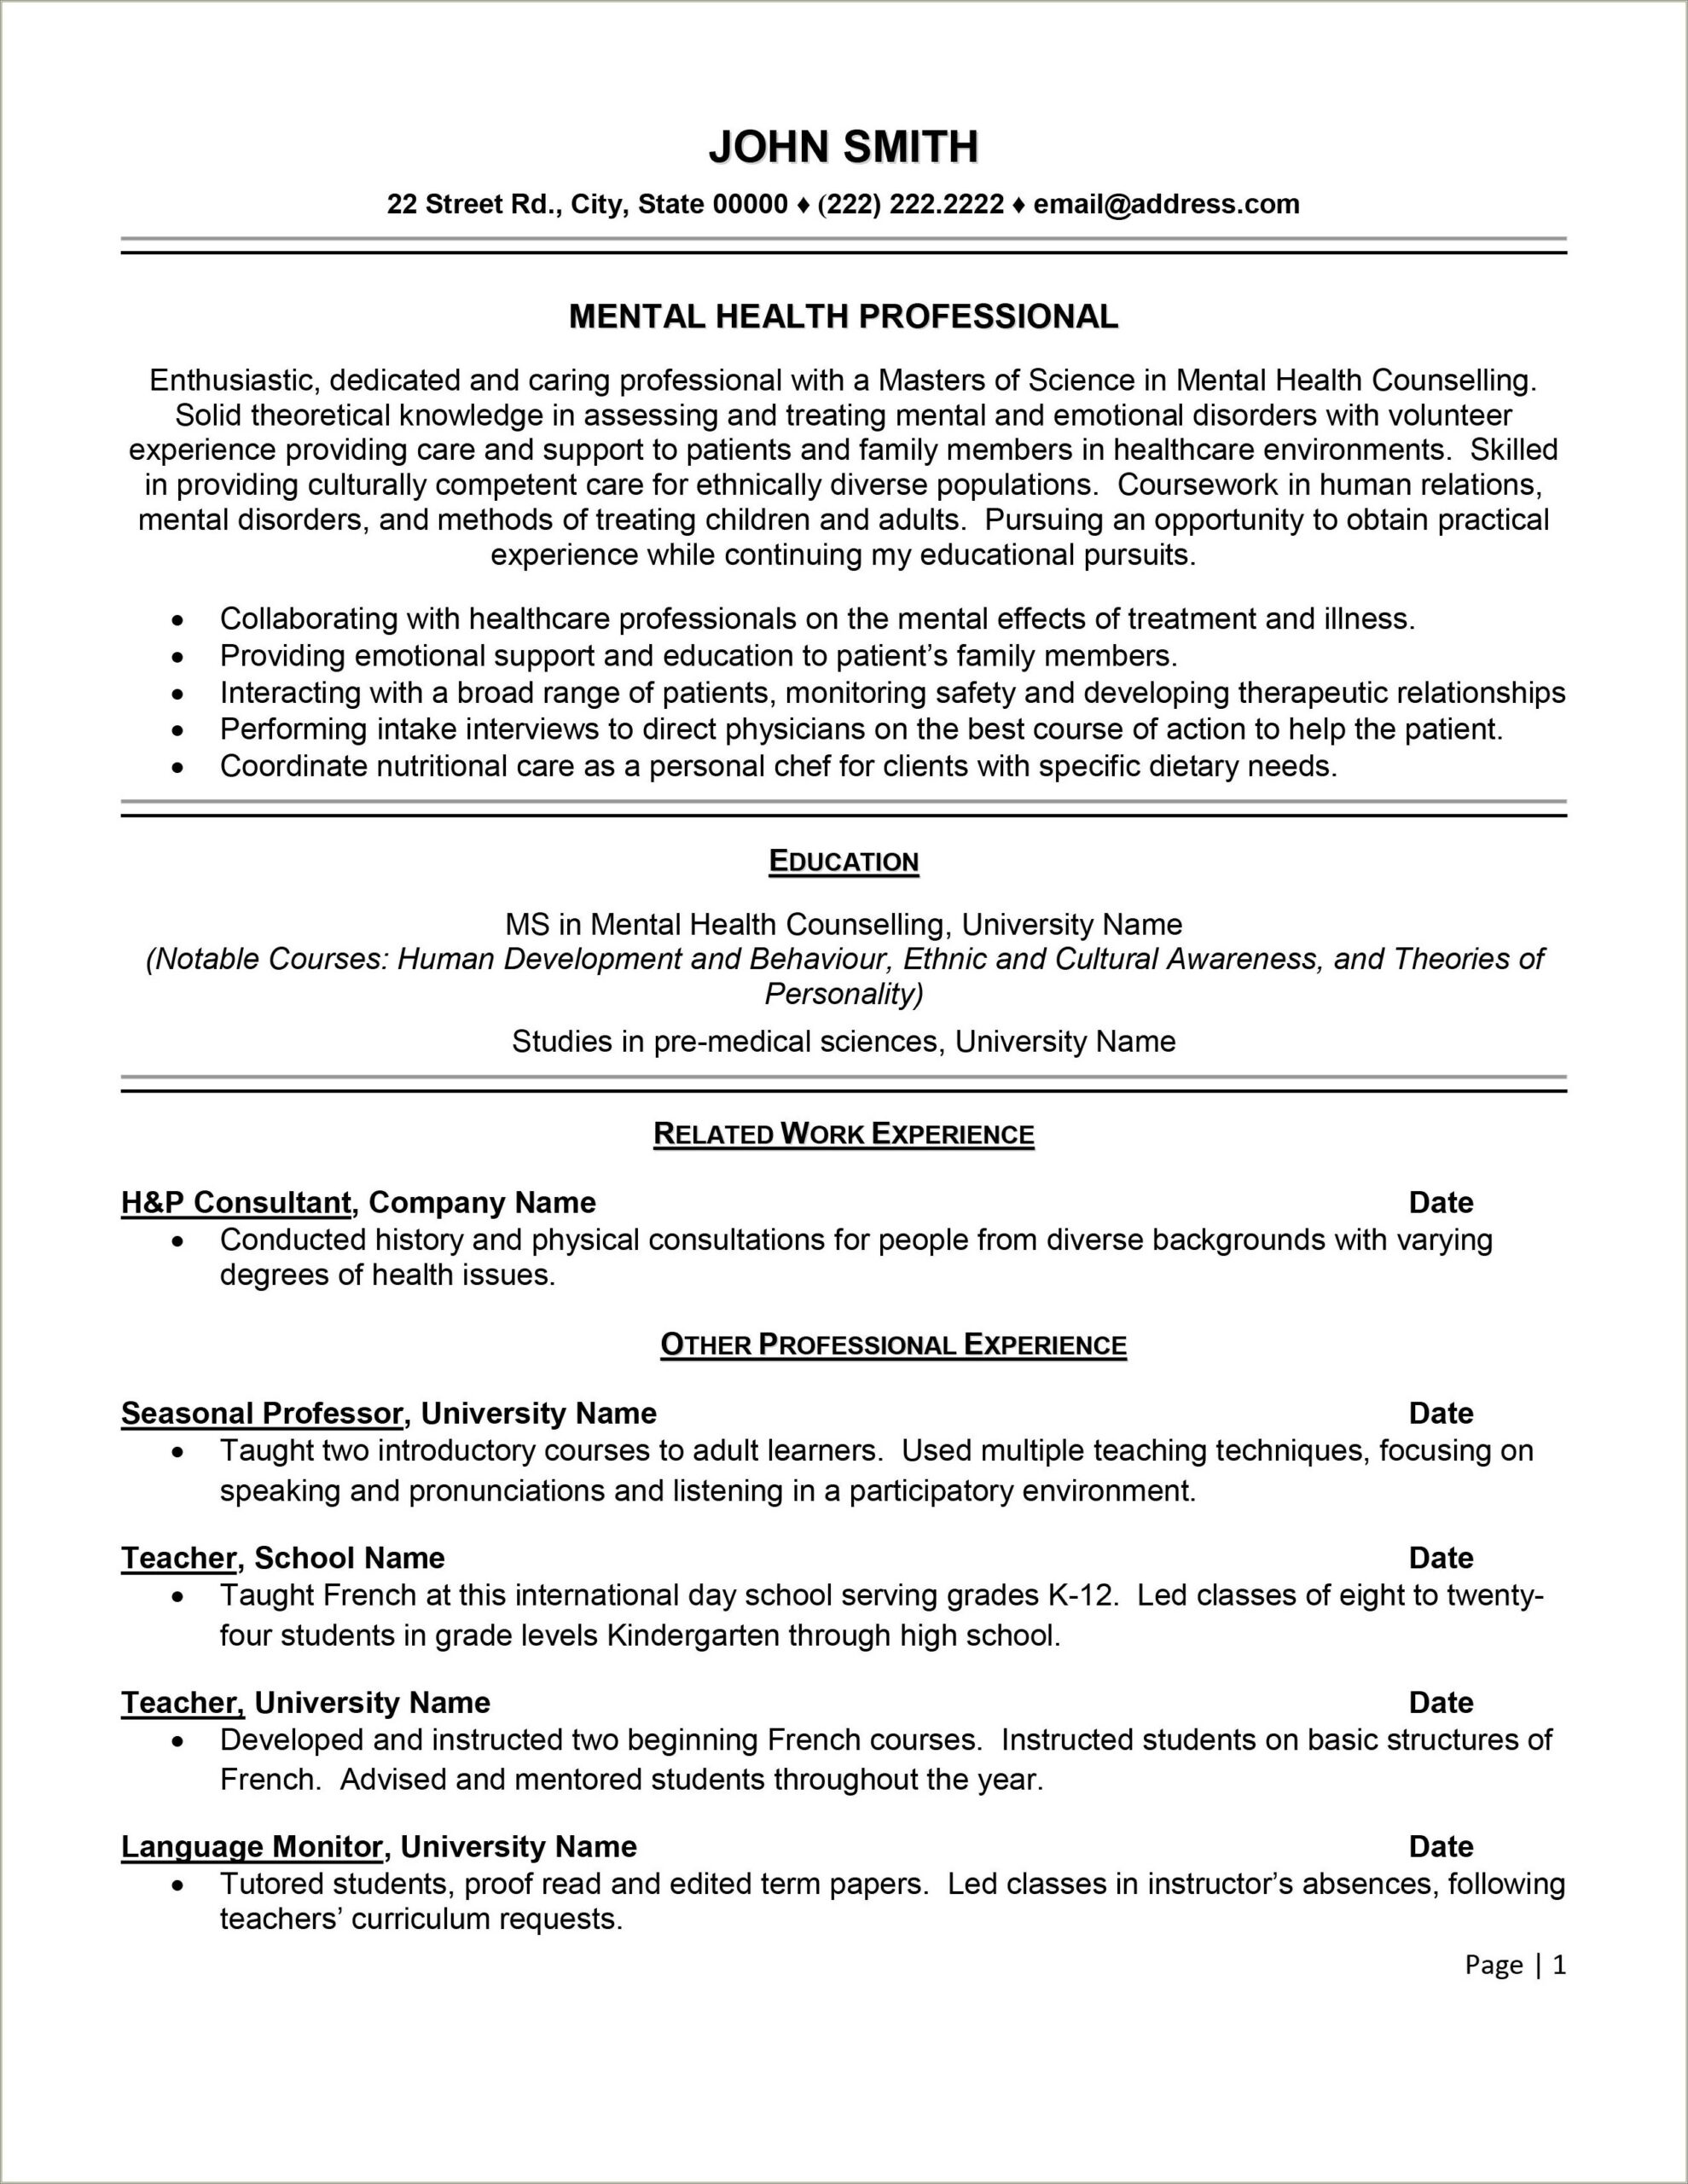 Health Coach And Personal Chef Sample Resume